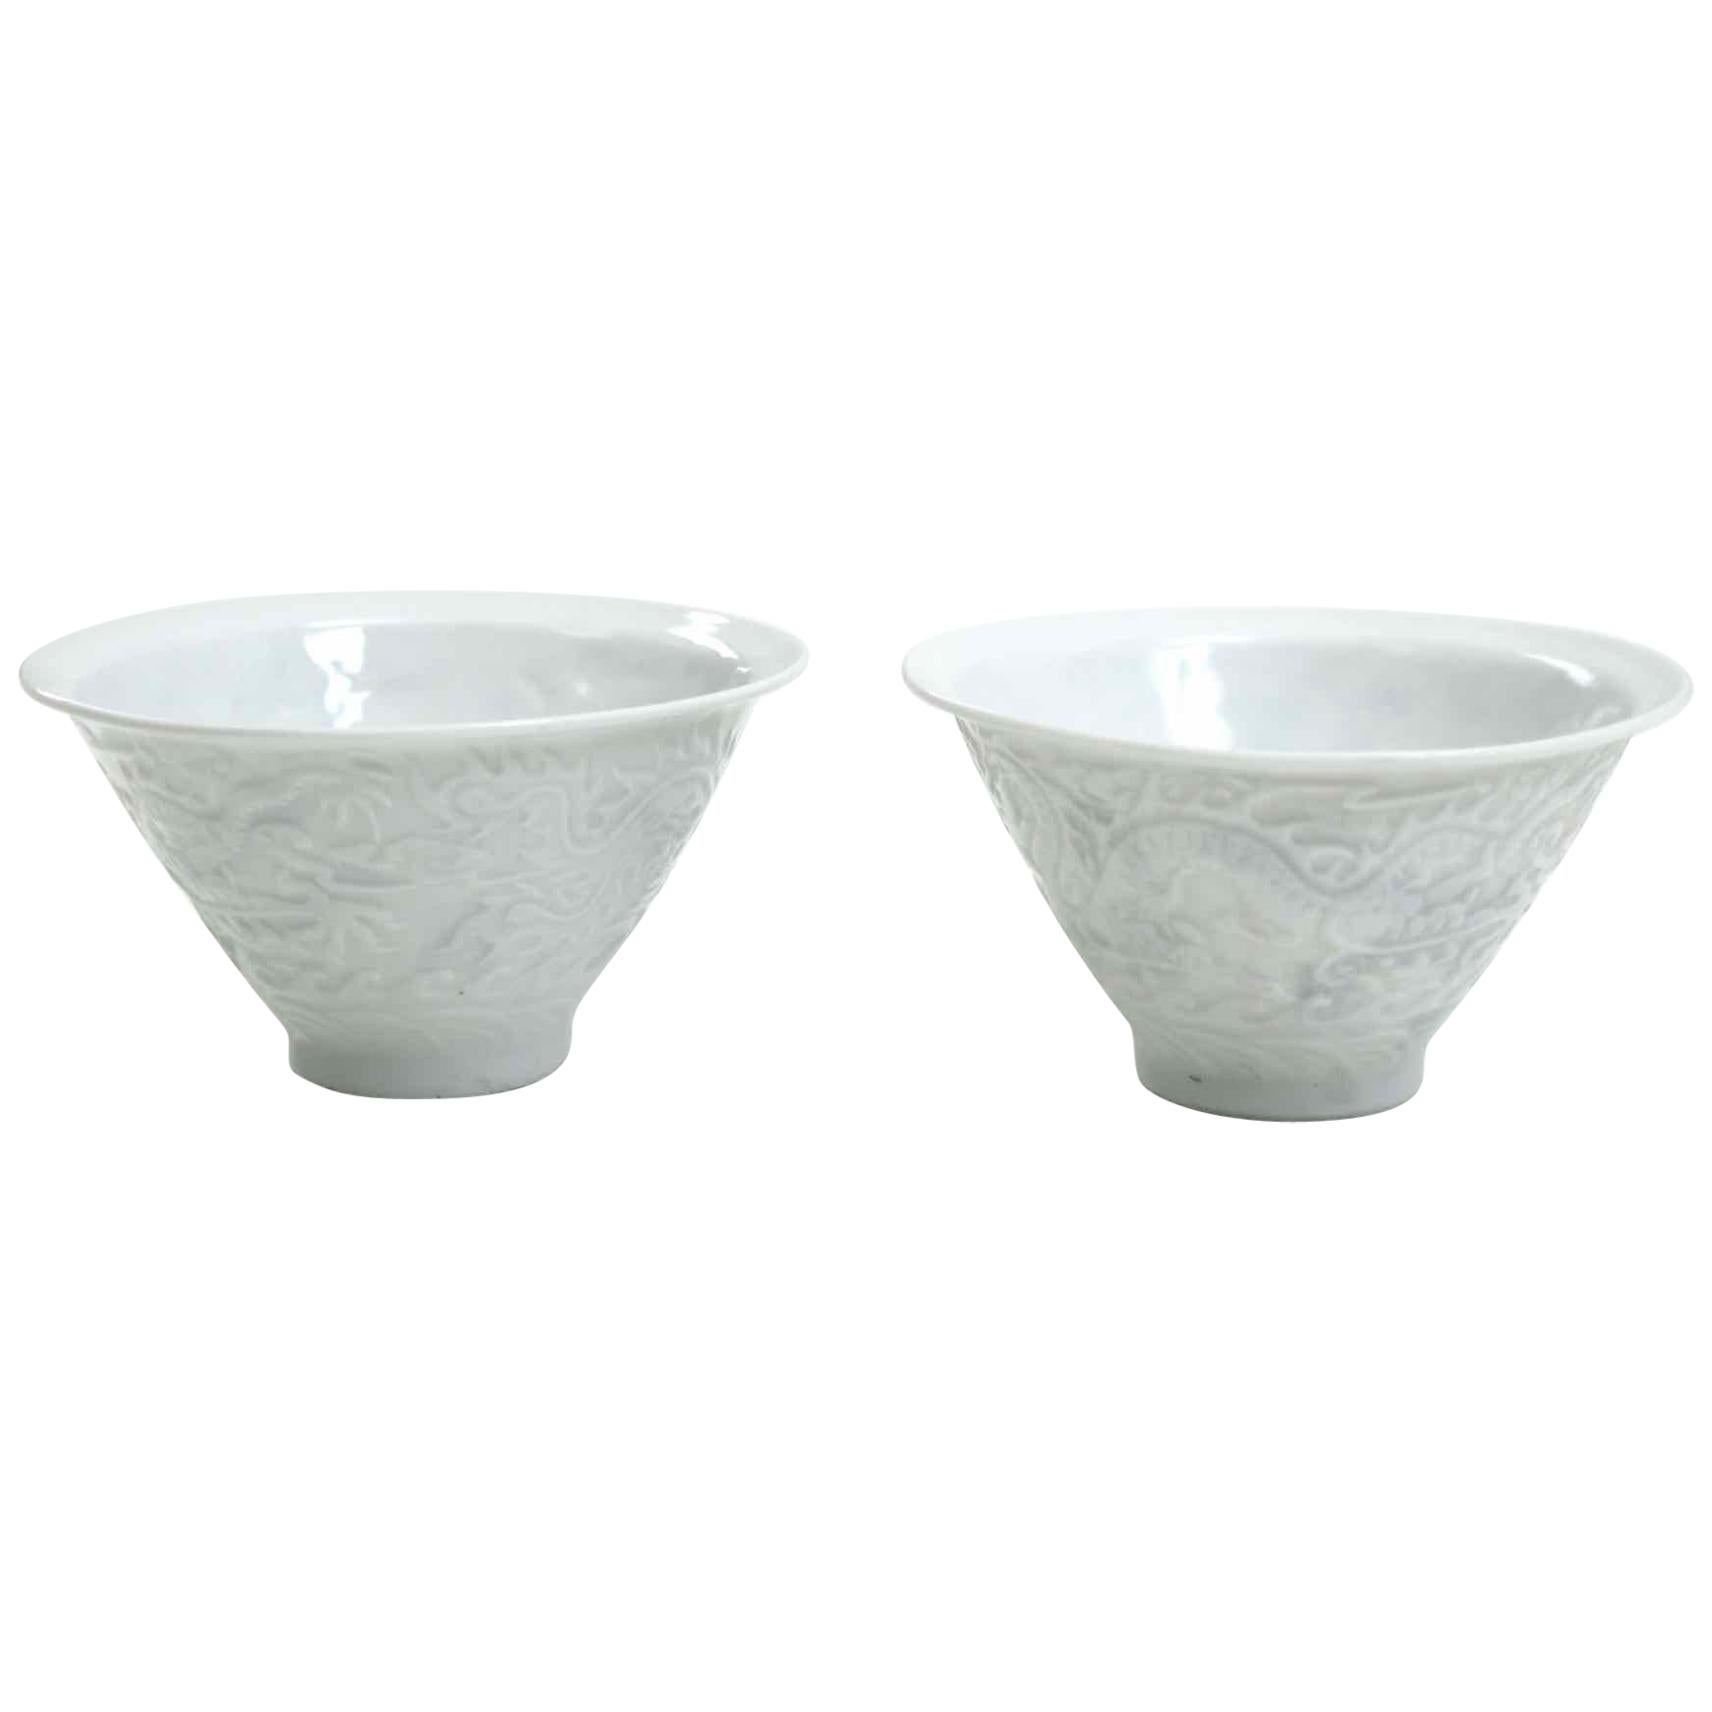 Pair of Chinese Bowls, Signed, 18th-19th Century